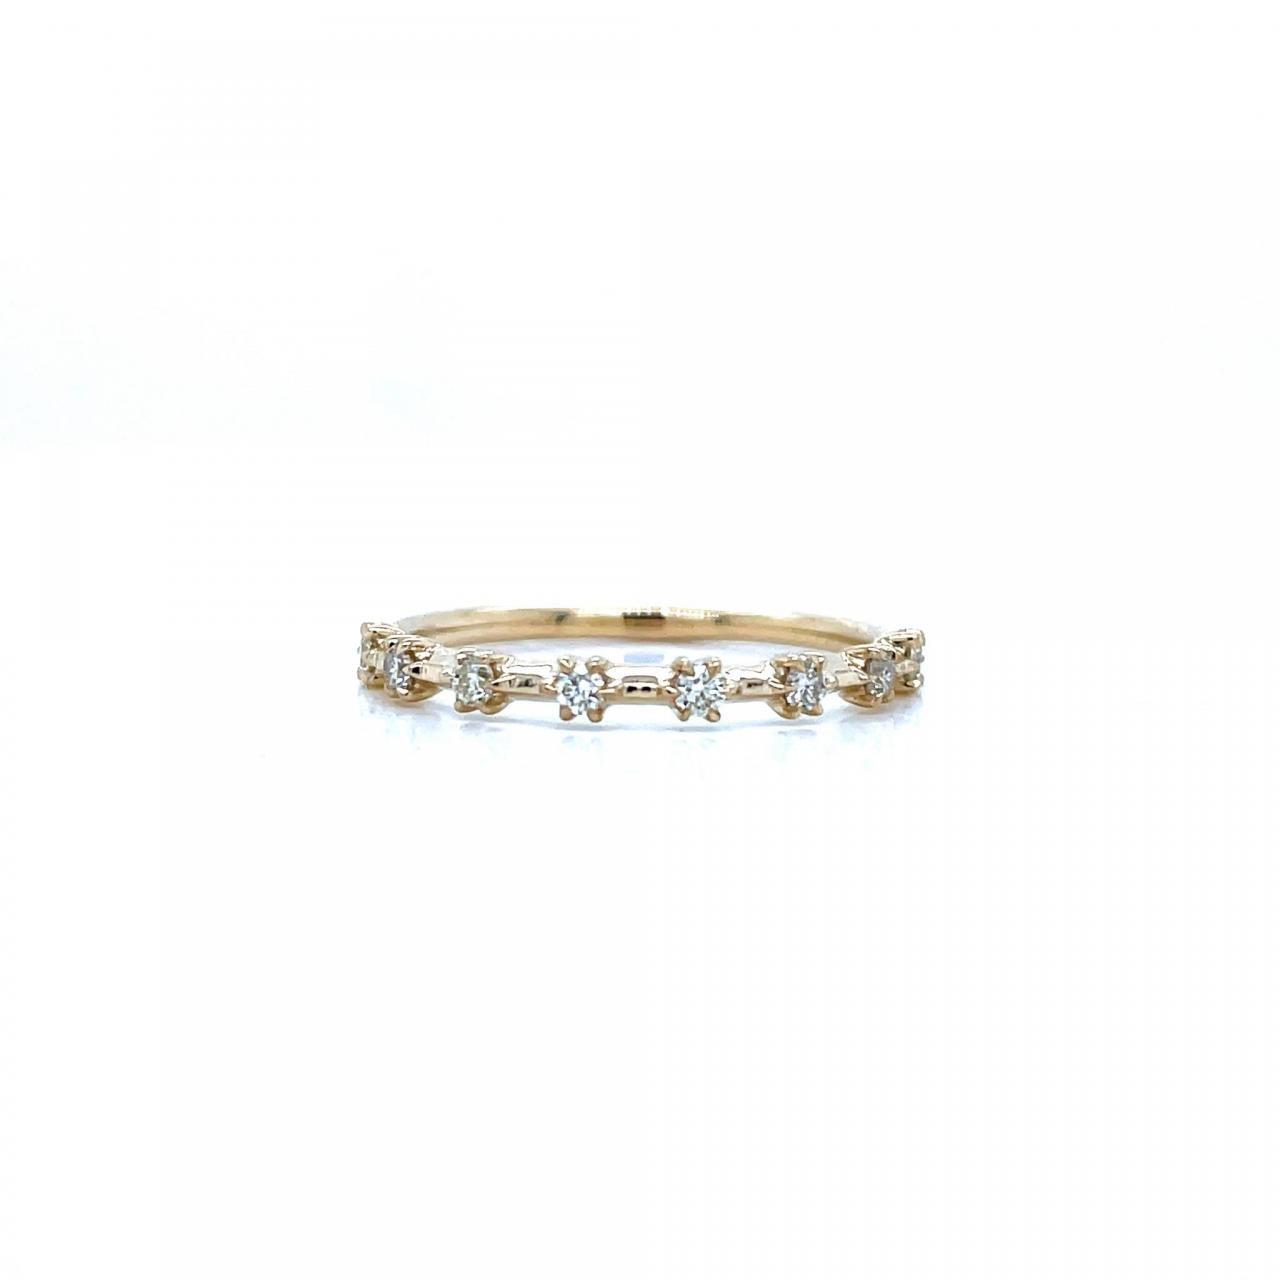 The Clementine Setting 9ct Yellow Gold Diamond Claw Set Ring